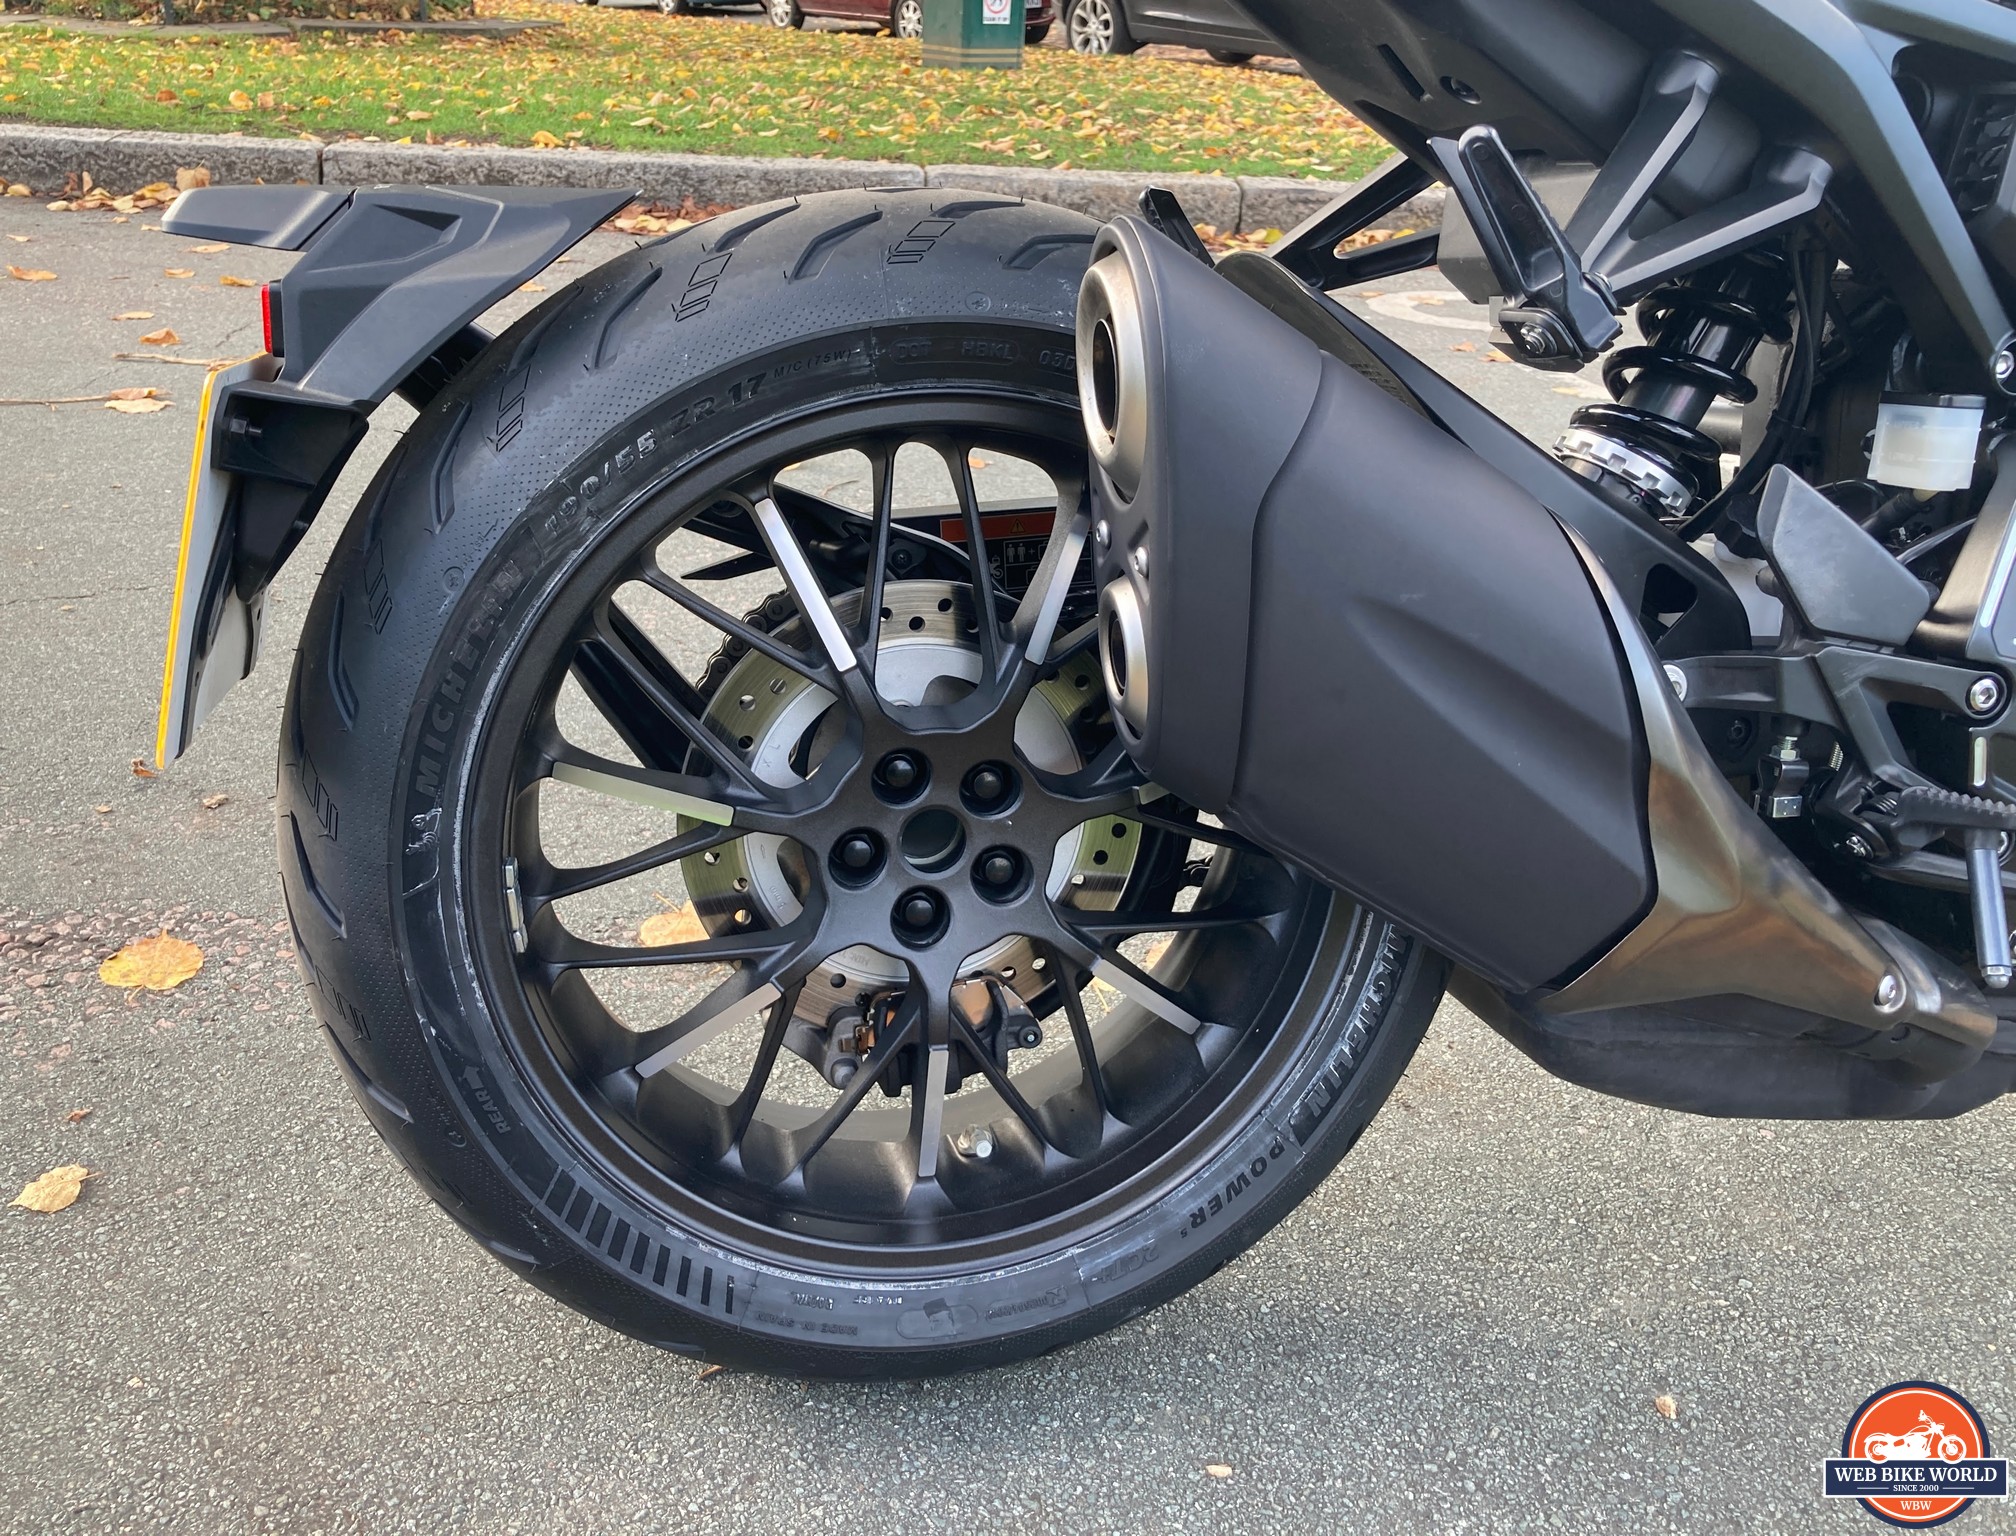 2022 CB1000R Black Edition Rear Wheel and Exhaust